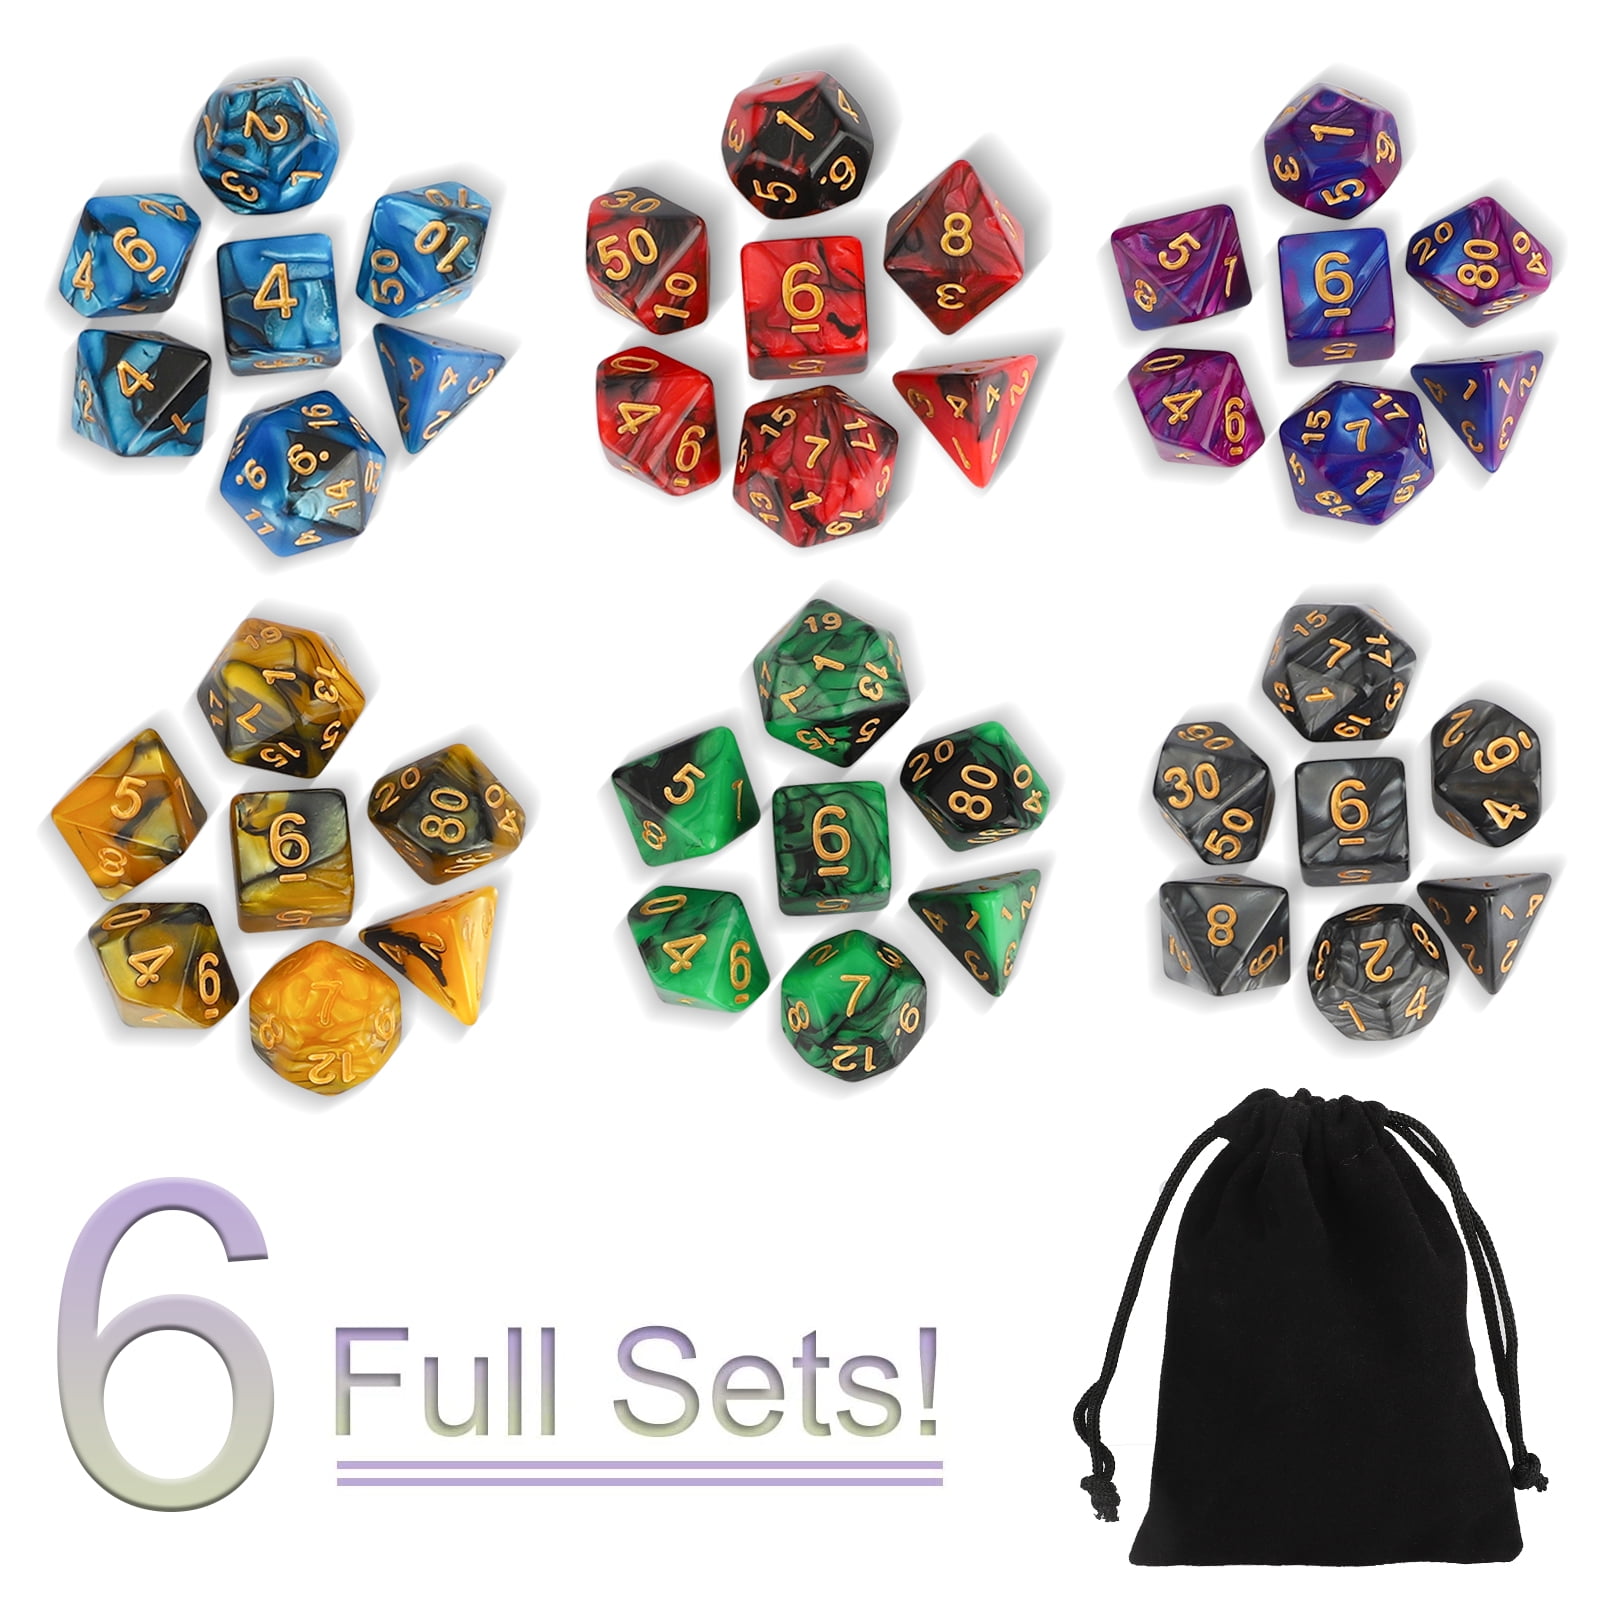 42 PCS/Set Dungeons & Dragons MTG Polyhedral Game Dice Six-Color DND RPG Dice 